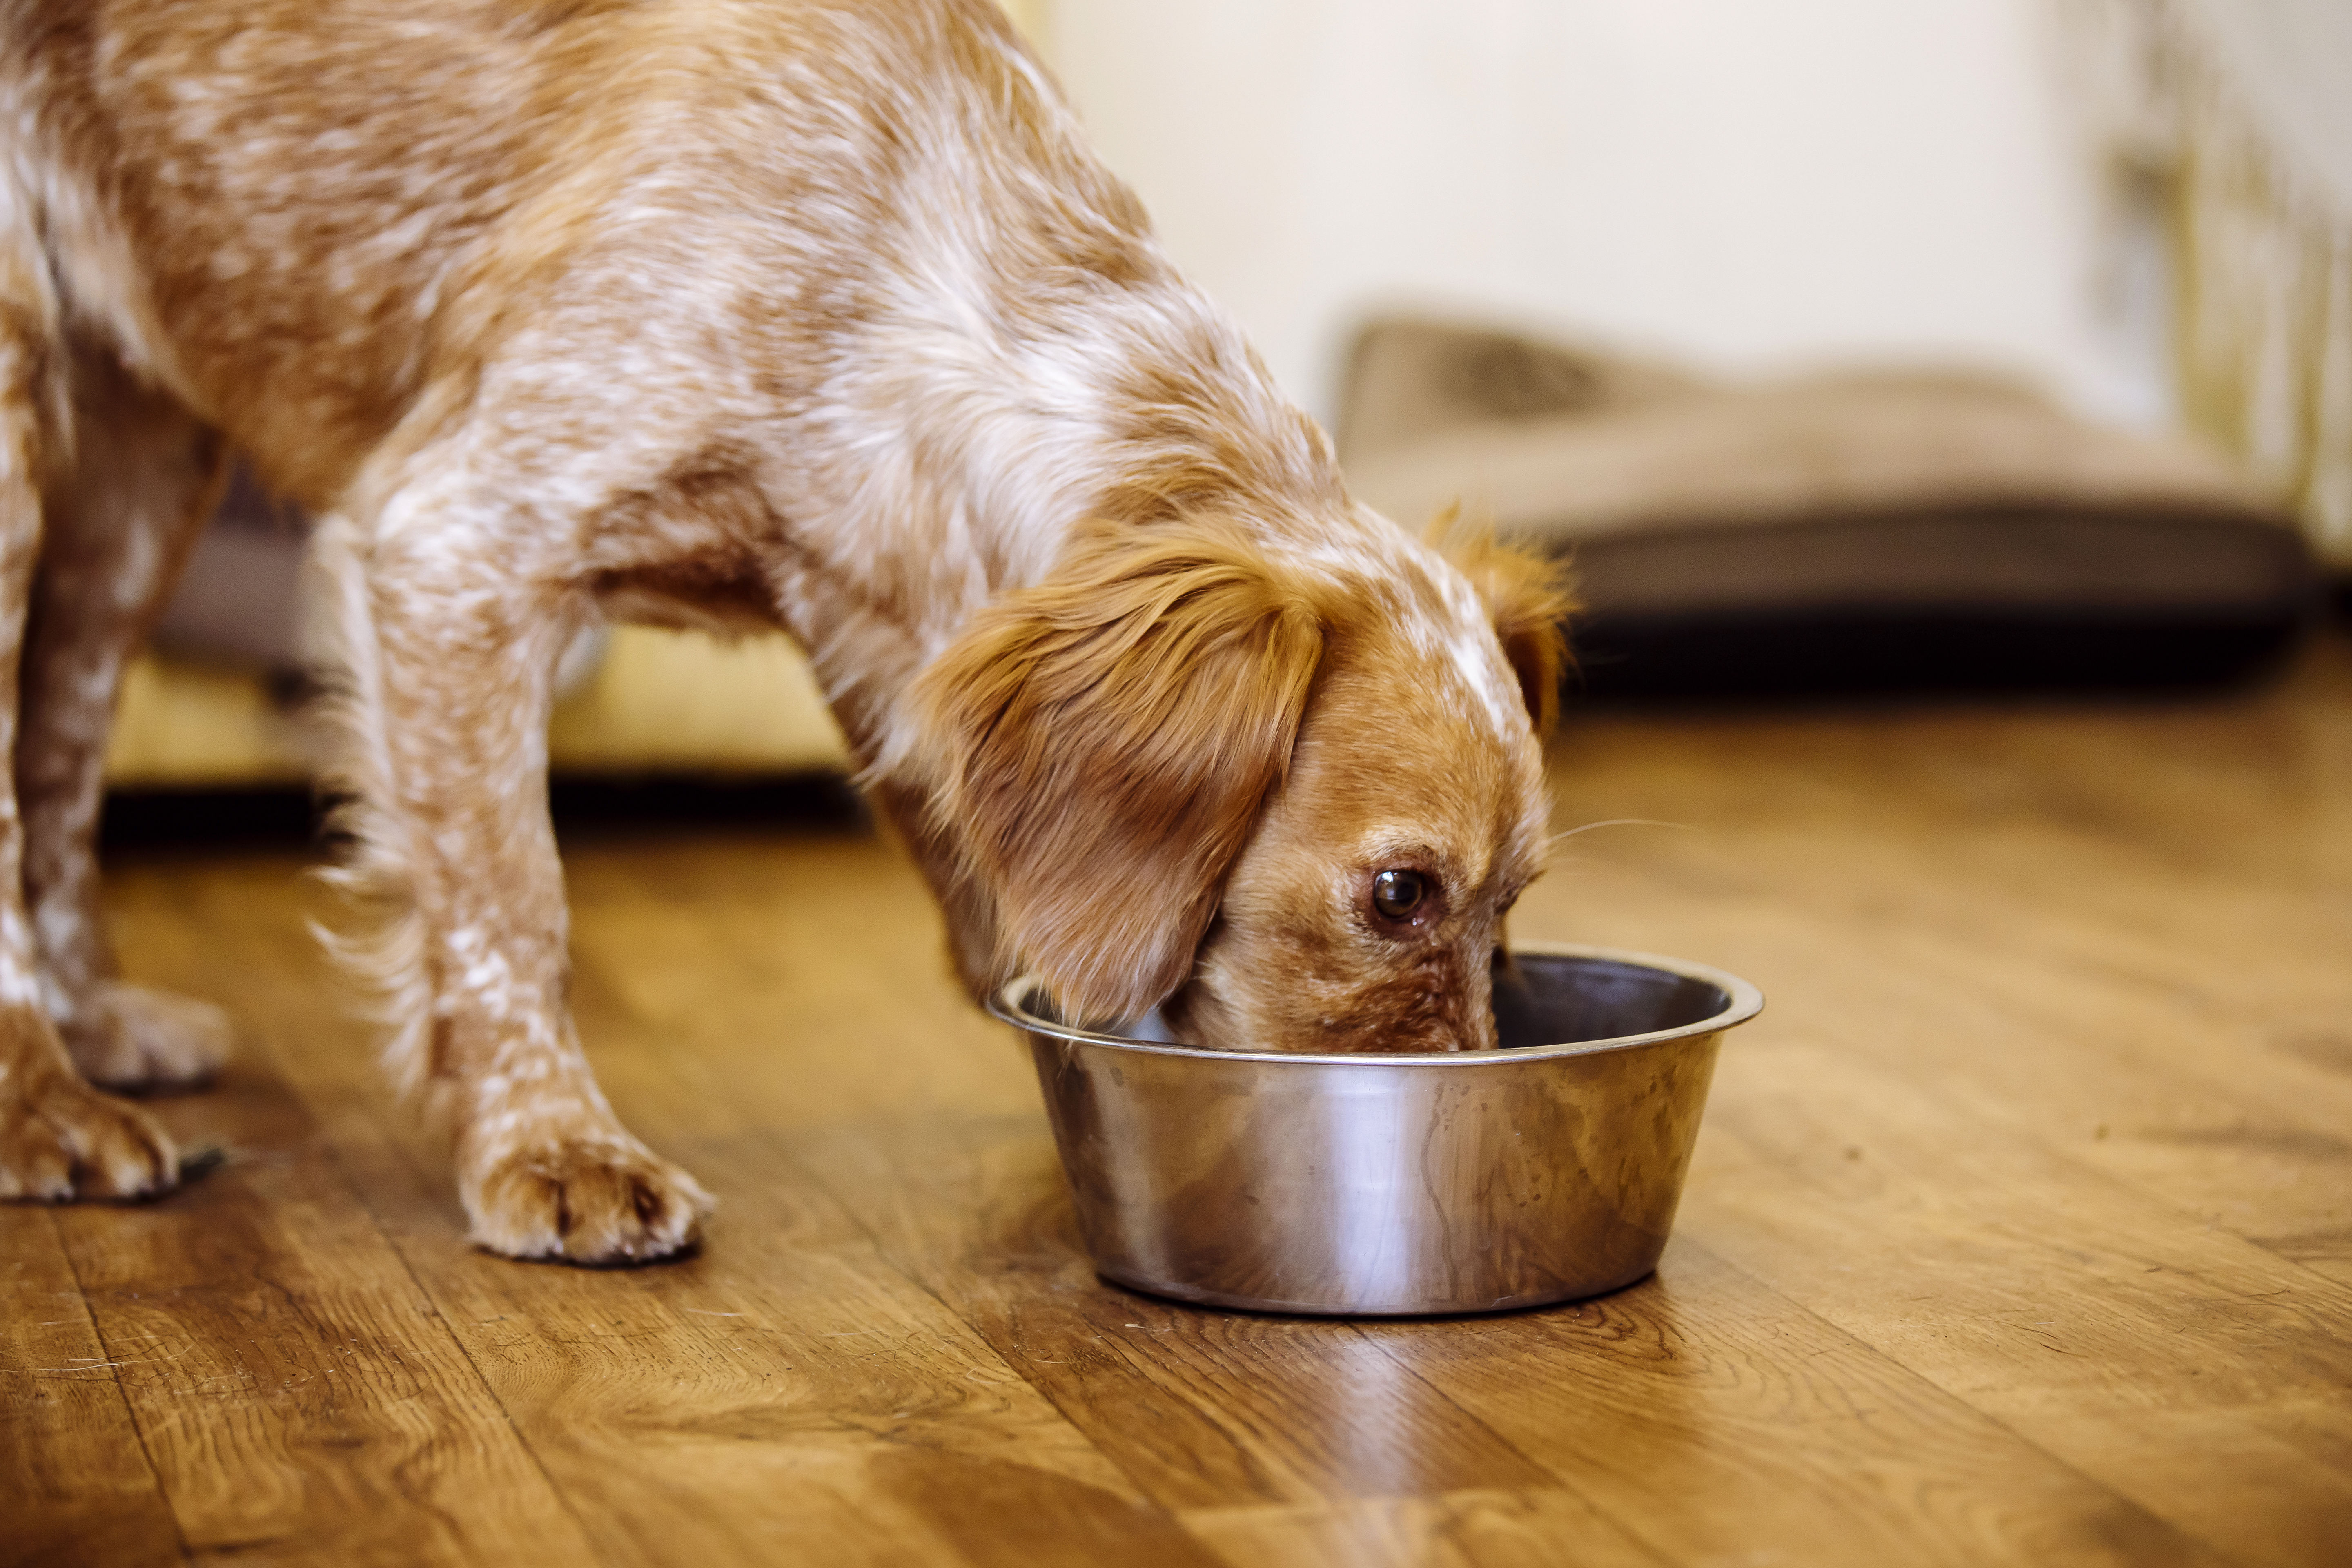 A dog eating food from a metal bowl.